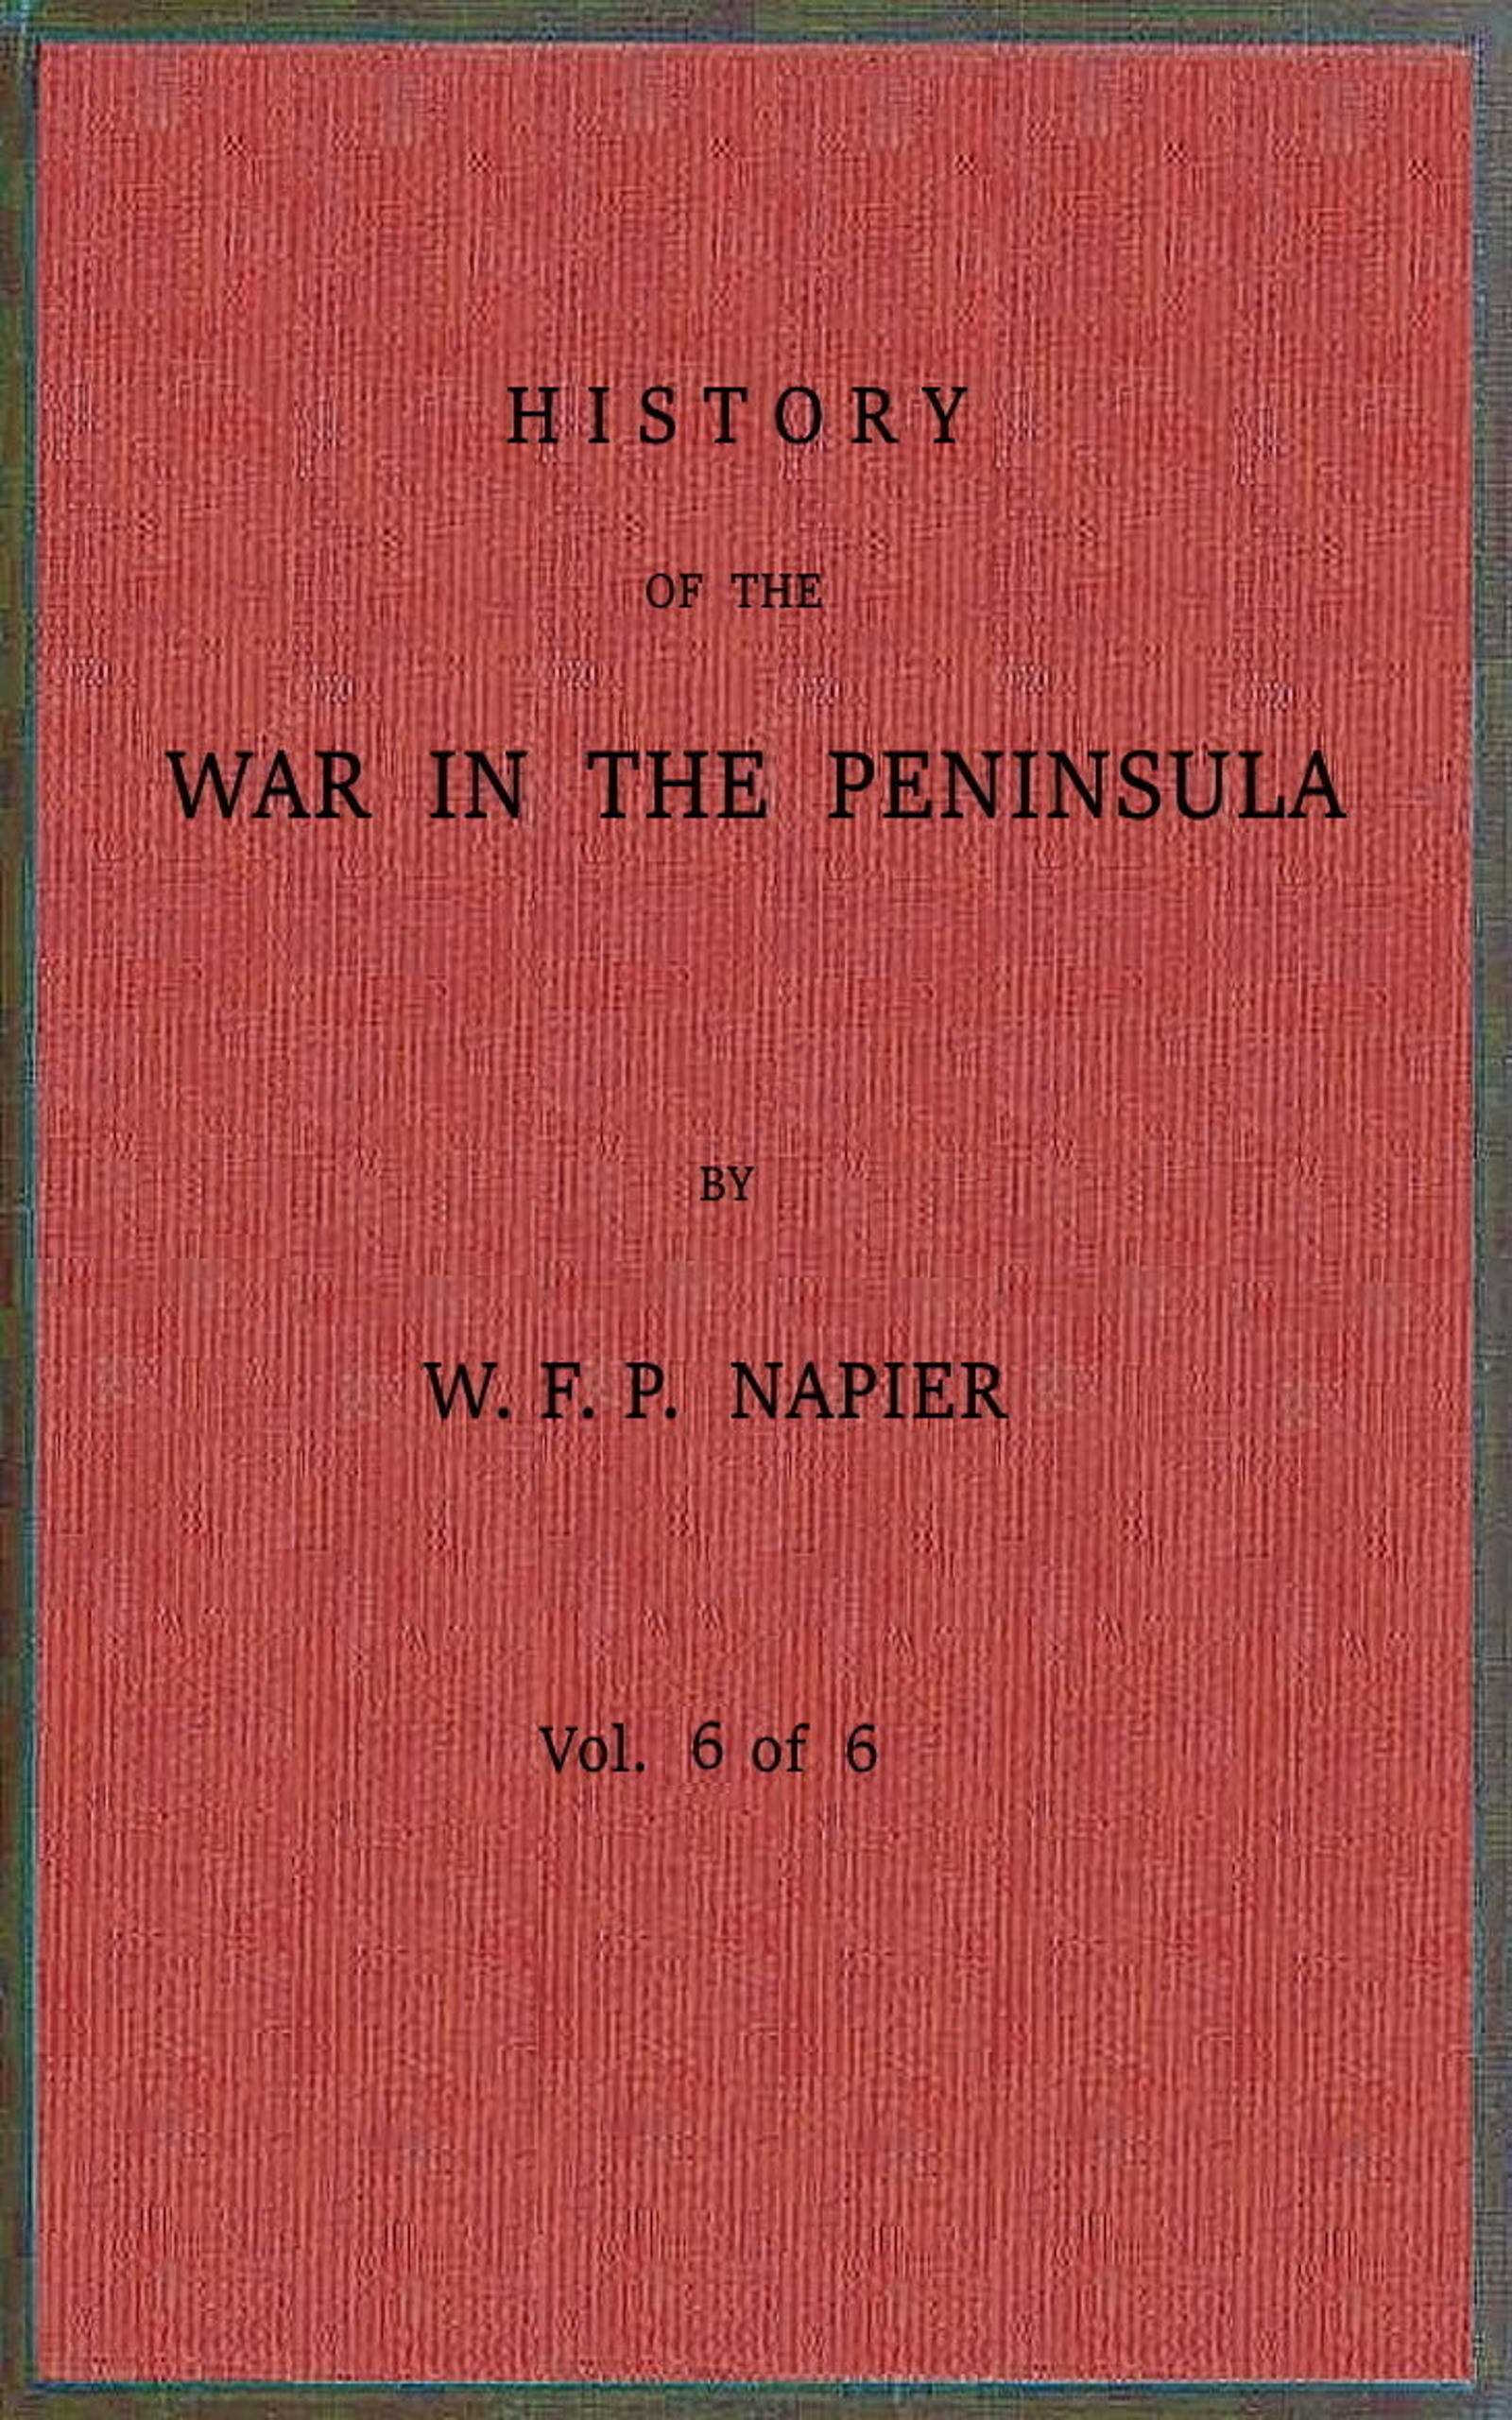 History of the war in the Peninsula and in the south of France from the year 1807 to the year 1814, vol. 6